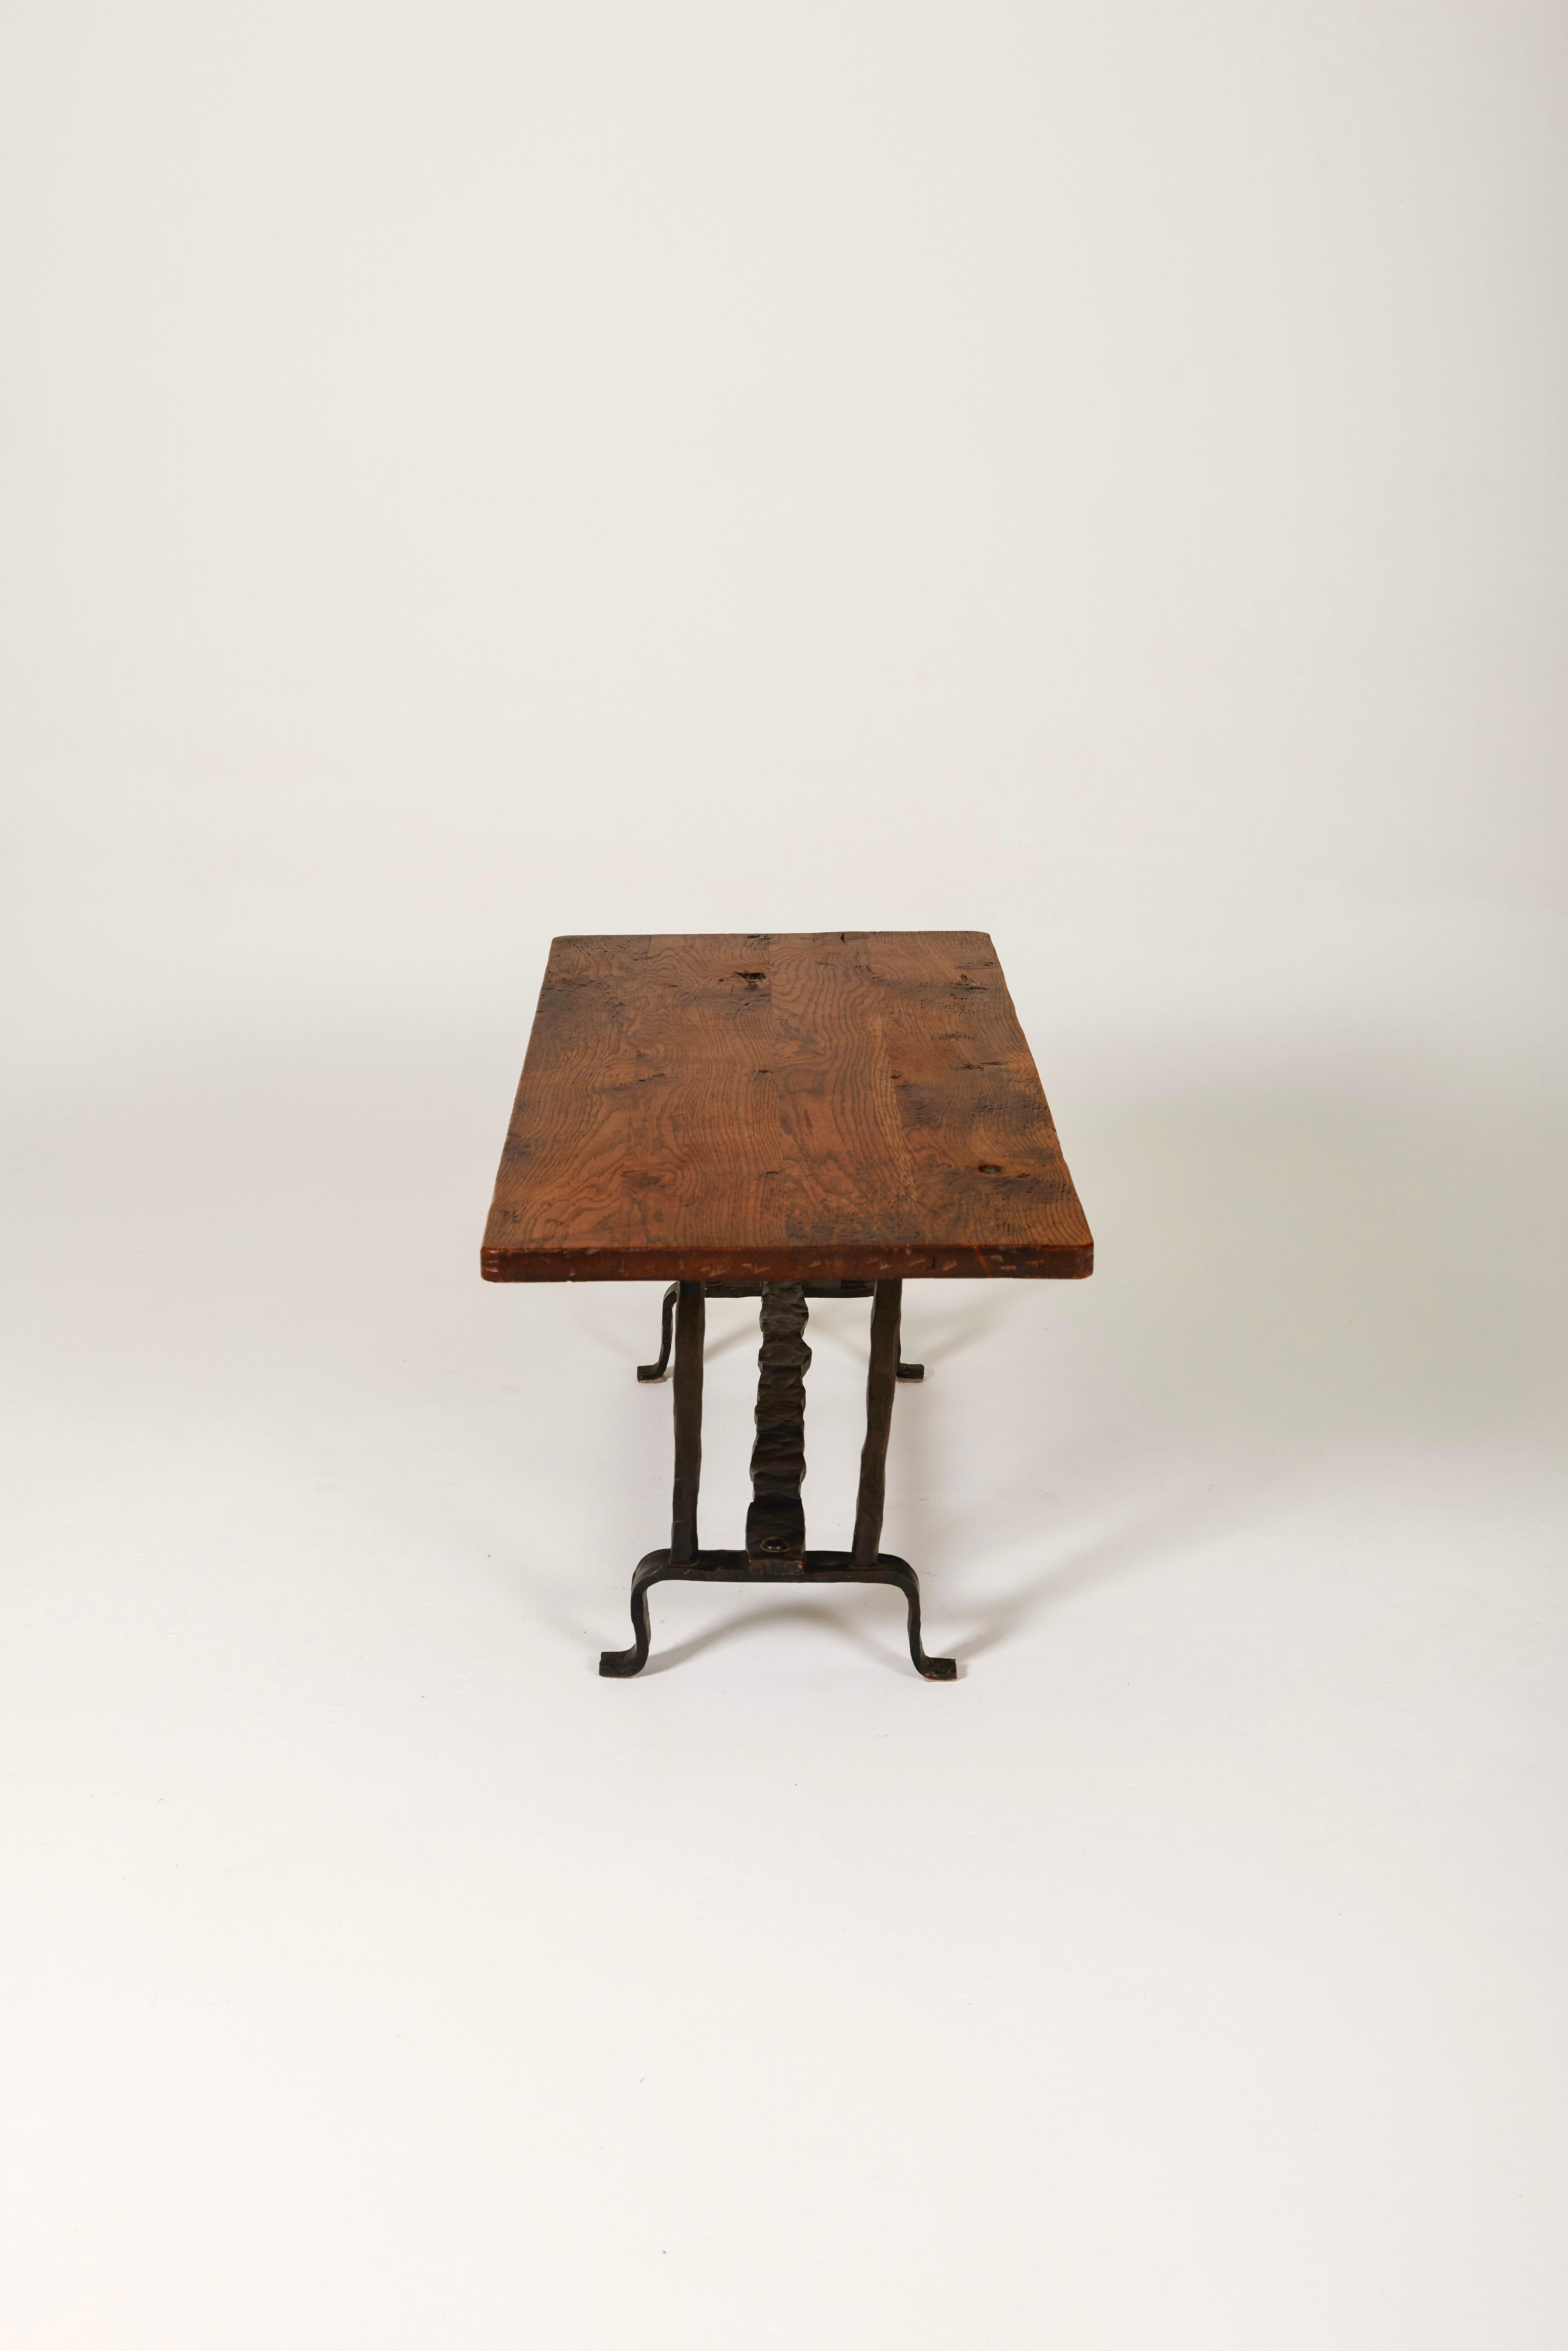 Coffee table or side table with an oak top and wrought iron base. French folk art that can be paired with furniture from the Marolles workshops. Very good condition.
LP1194
